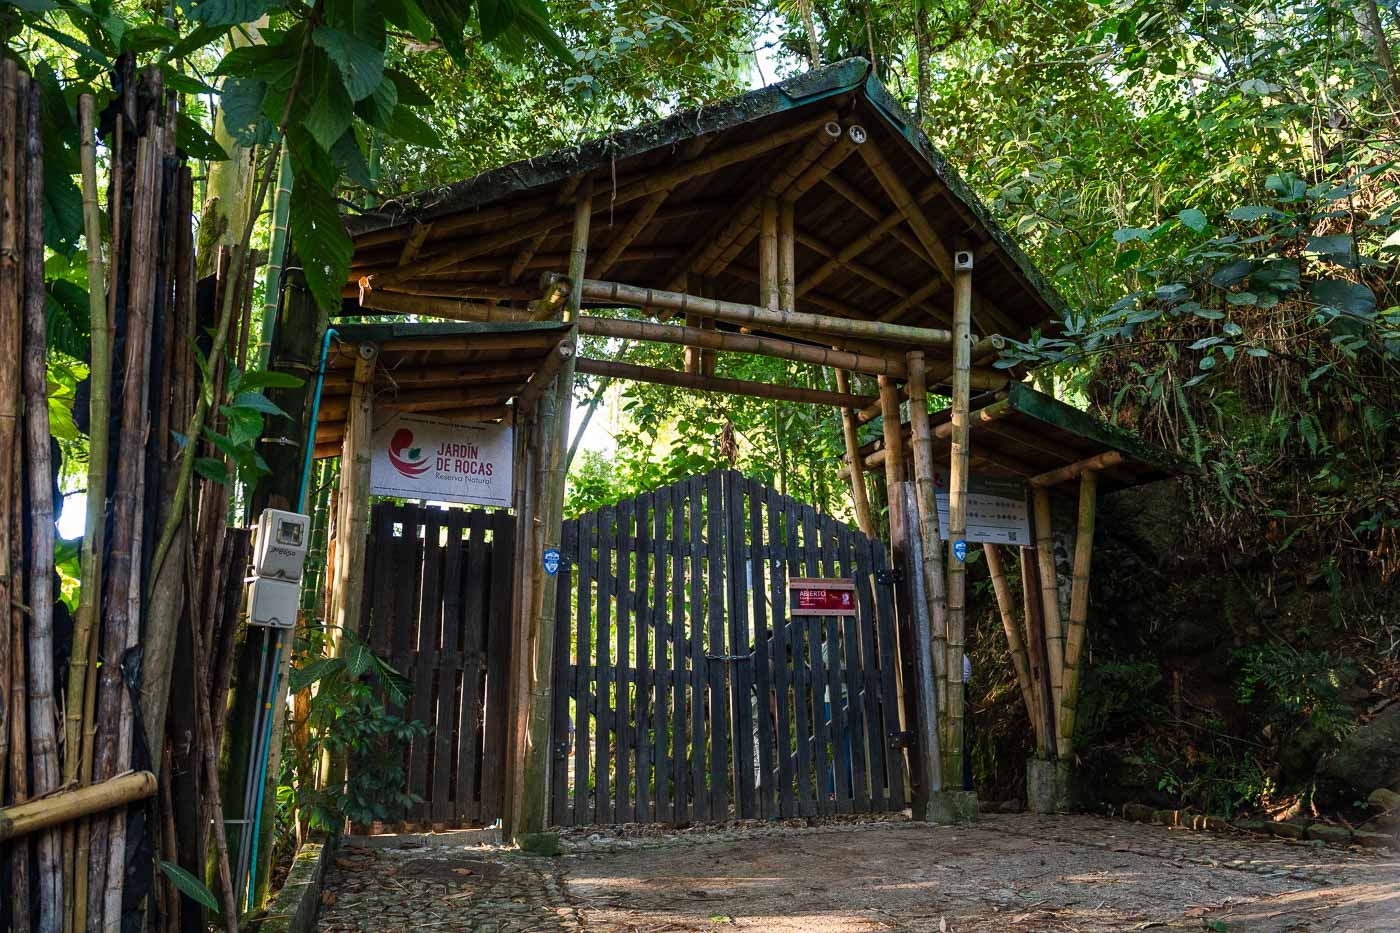 The wooden and bamboo entrance gate to the Jardin de Rocas nature reserve.